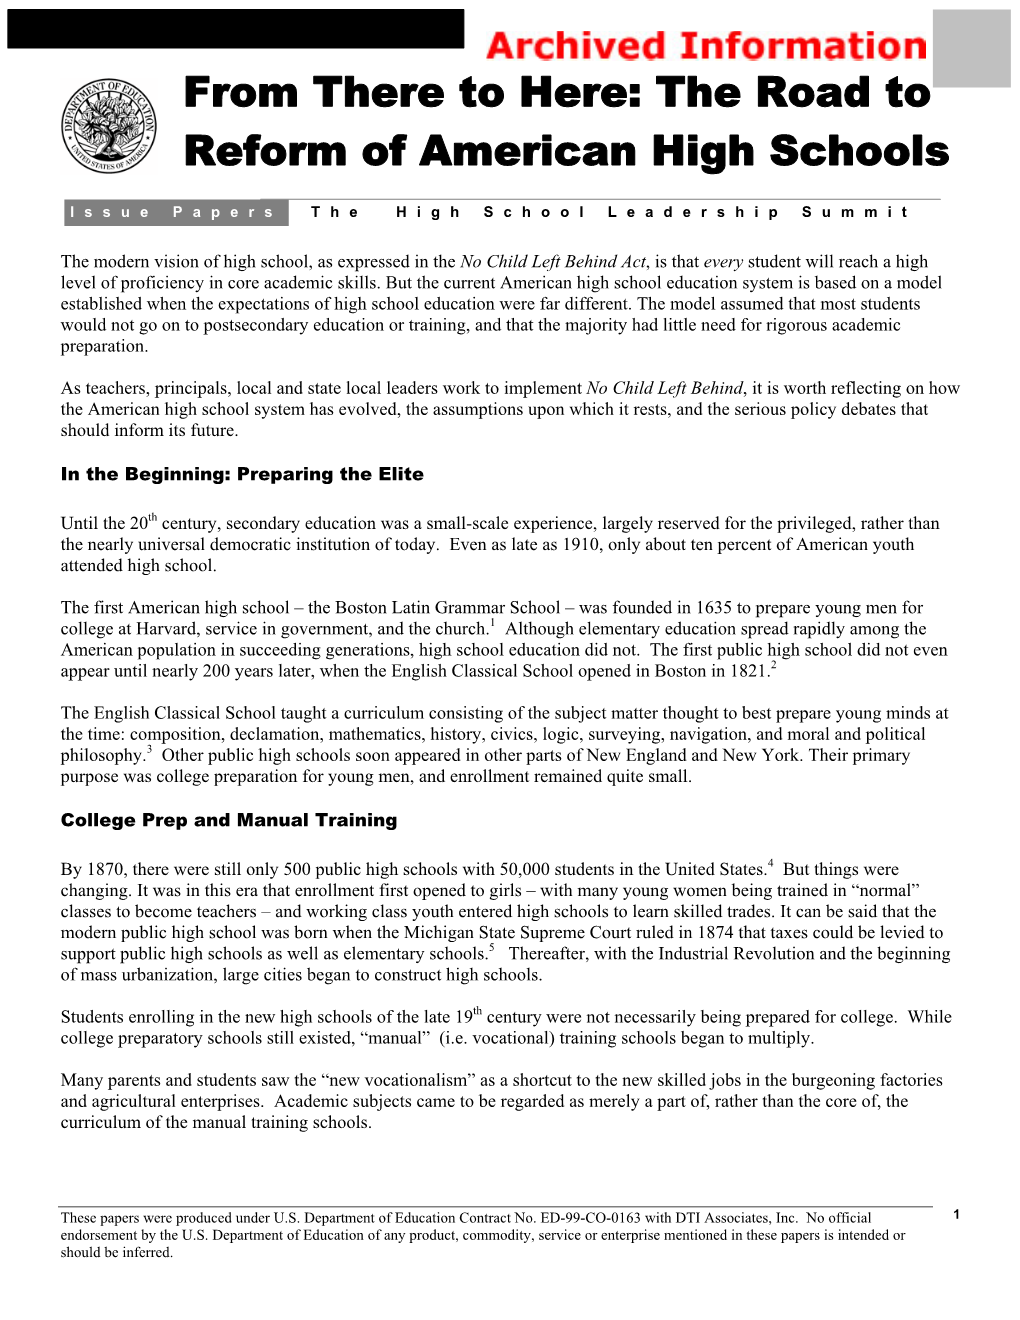 From There to Here: the Road to Reform of American High Schools